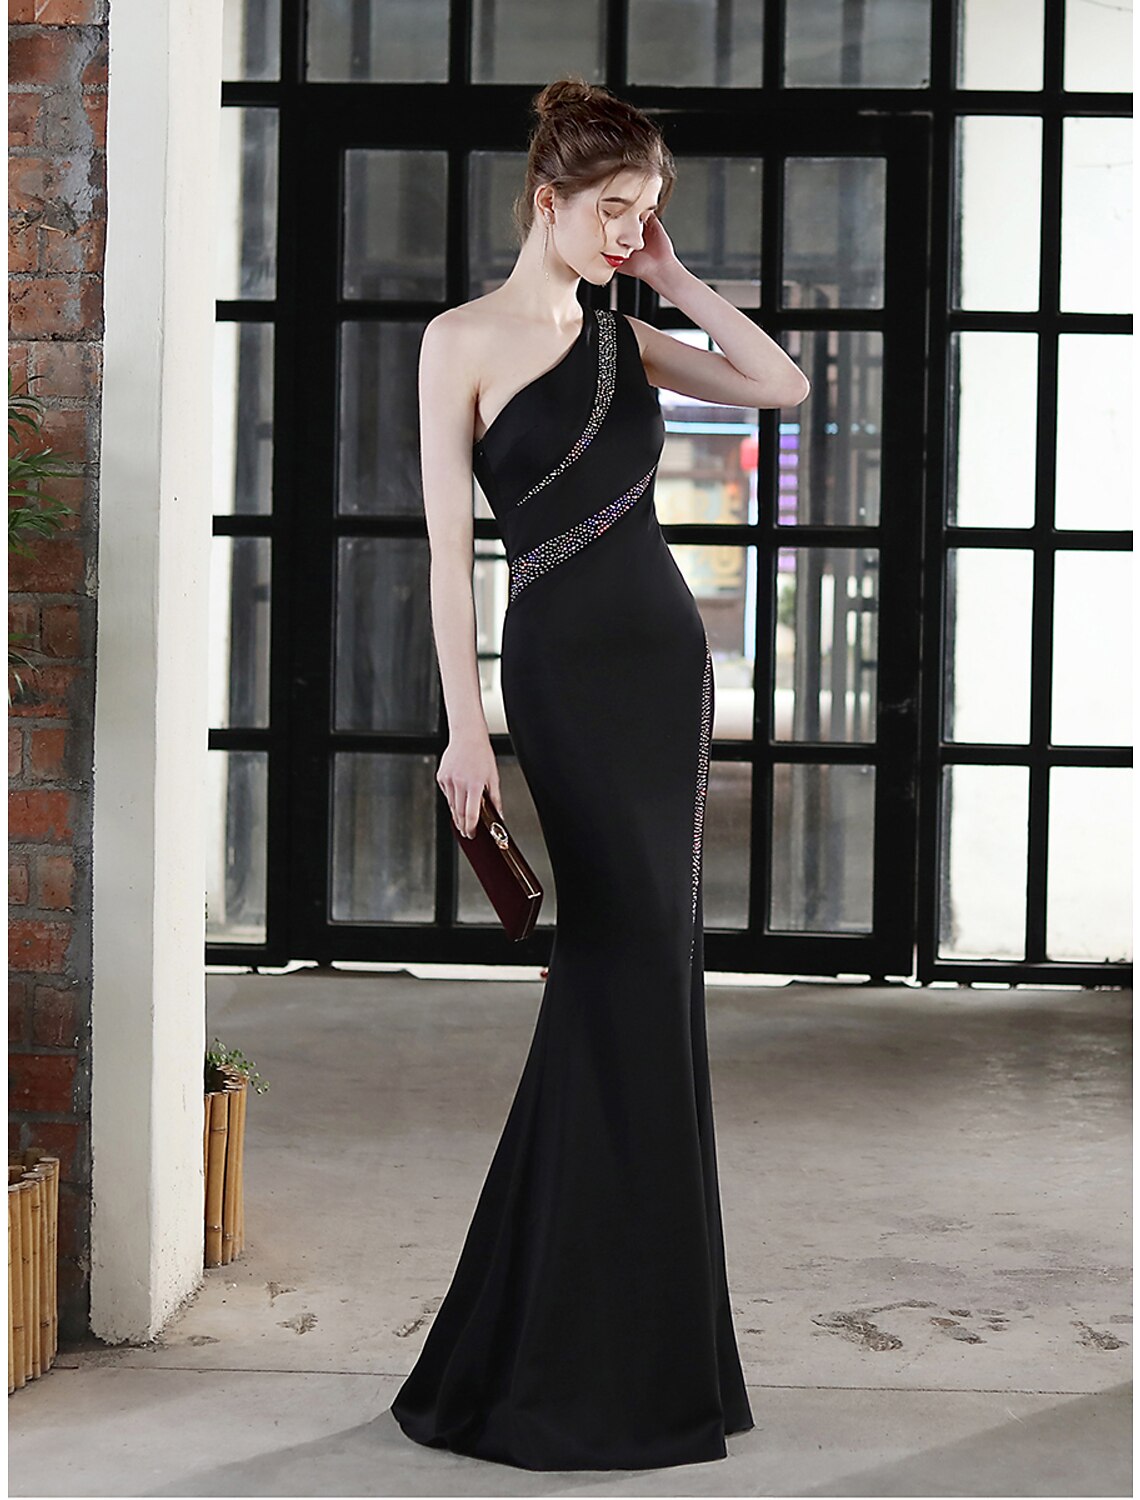 Mermaid / Trumpet Evening Gown Sexy Dress Wedding Guest Floor Length Sleeveless One Shoulder Stretch Satin with Crystals